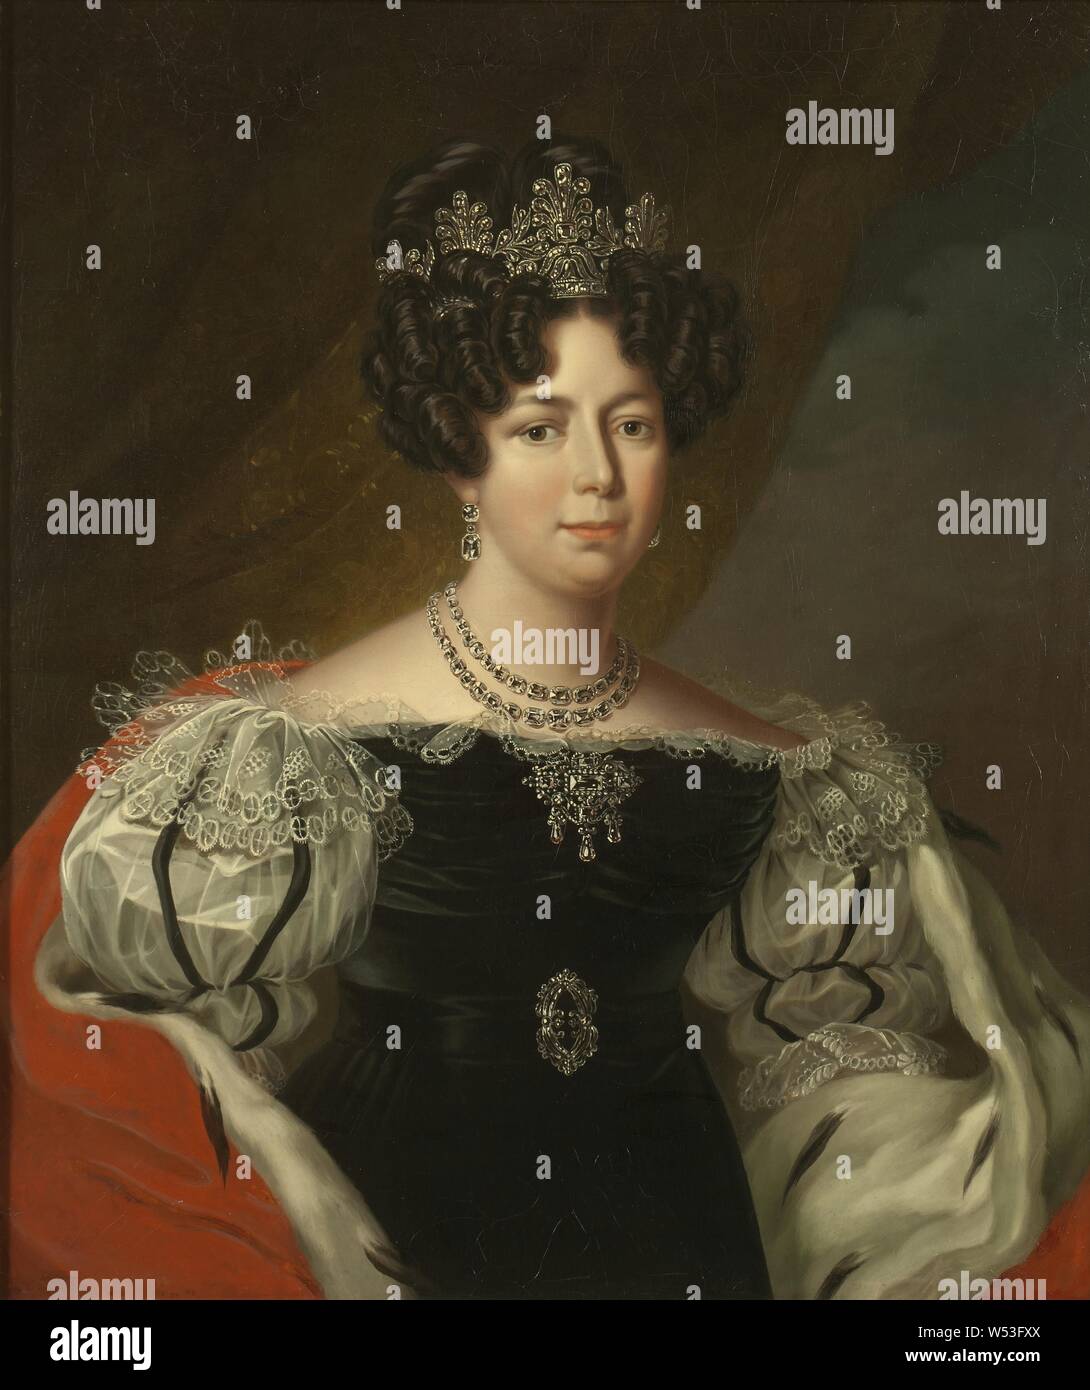 Attributed to Fredric Westin, Queen Desideria, Desideria, 1777-1860, Queen of Sweden and Norway, painting, oil on canvas, Height, 82 cm (32.2 inches), Width, 60 cm (23.6 inches) Stock Photo